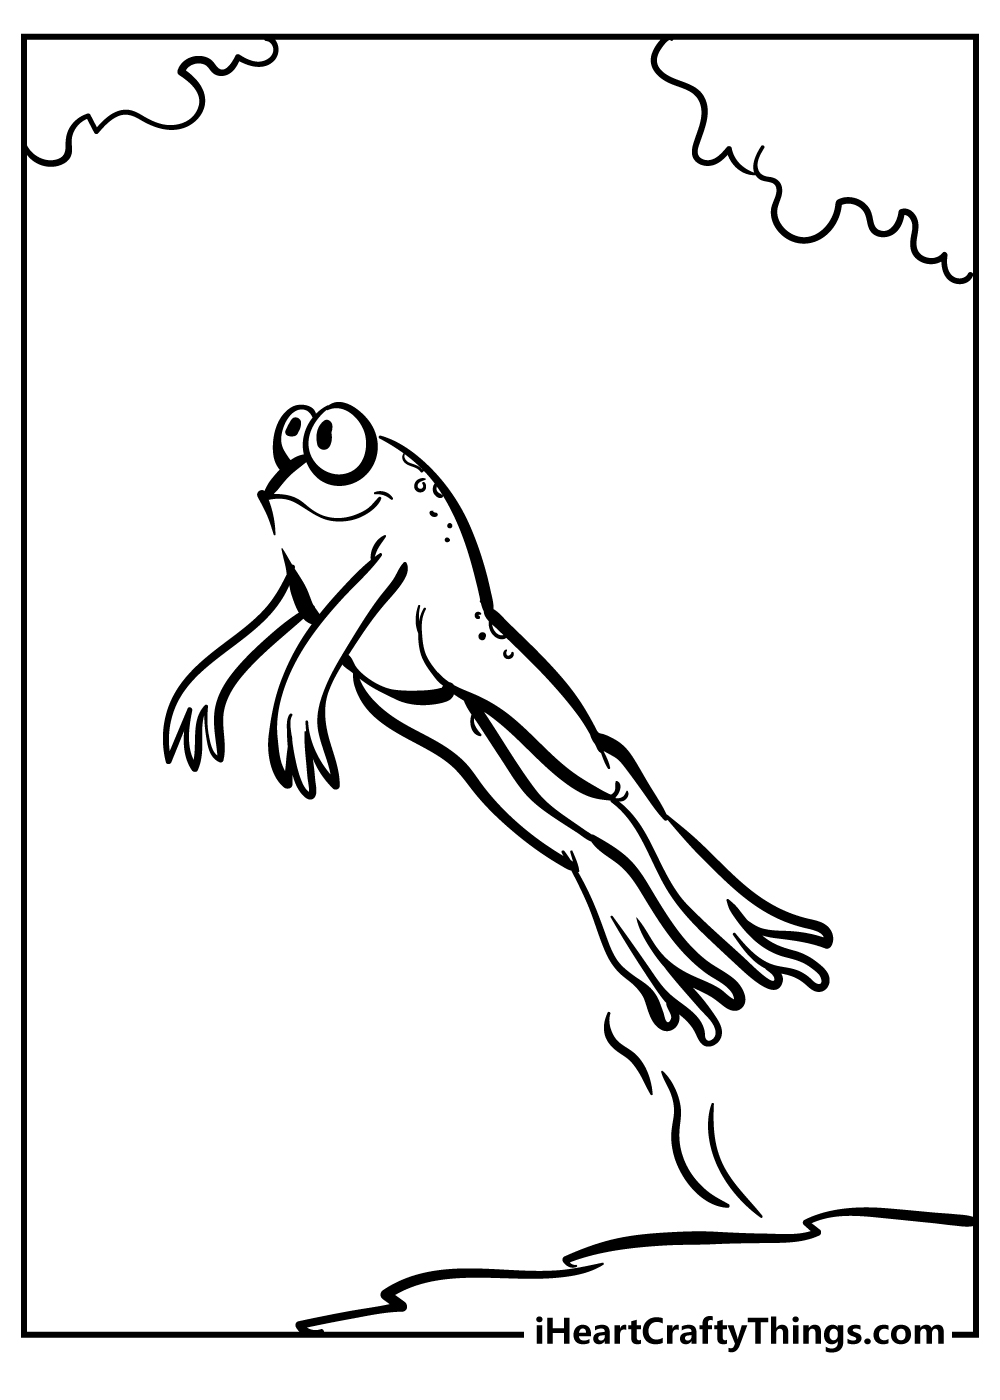 Frog coloring pages free printable